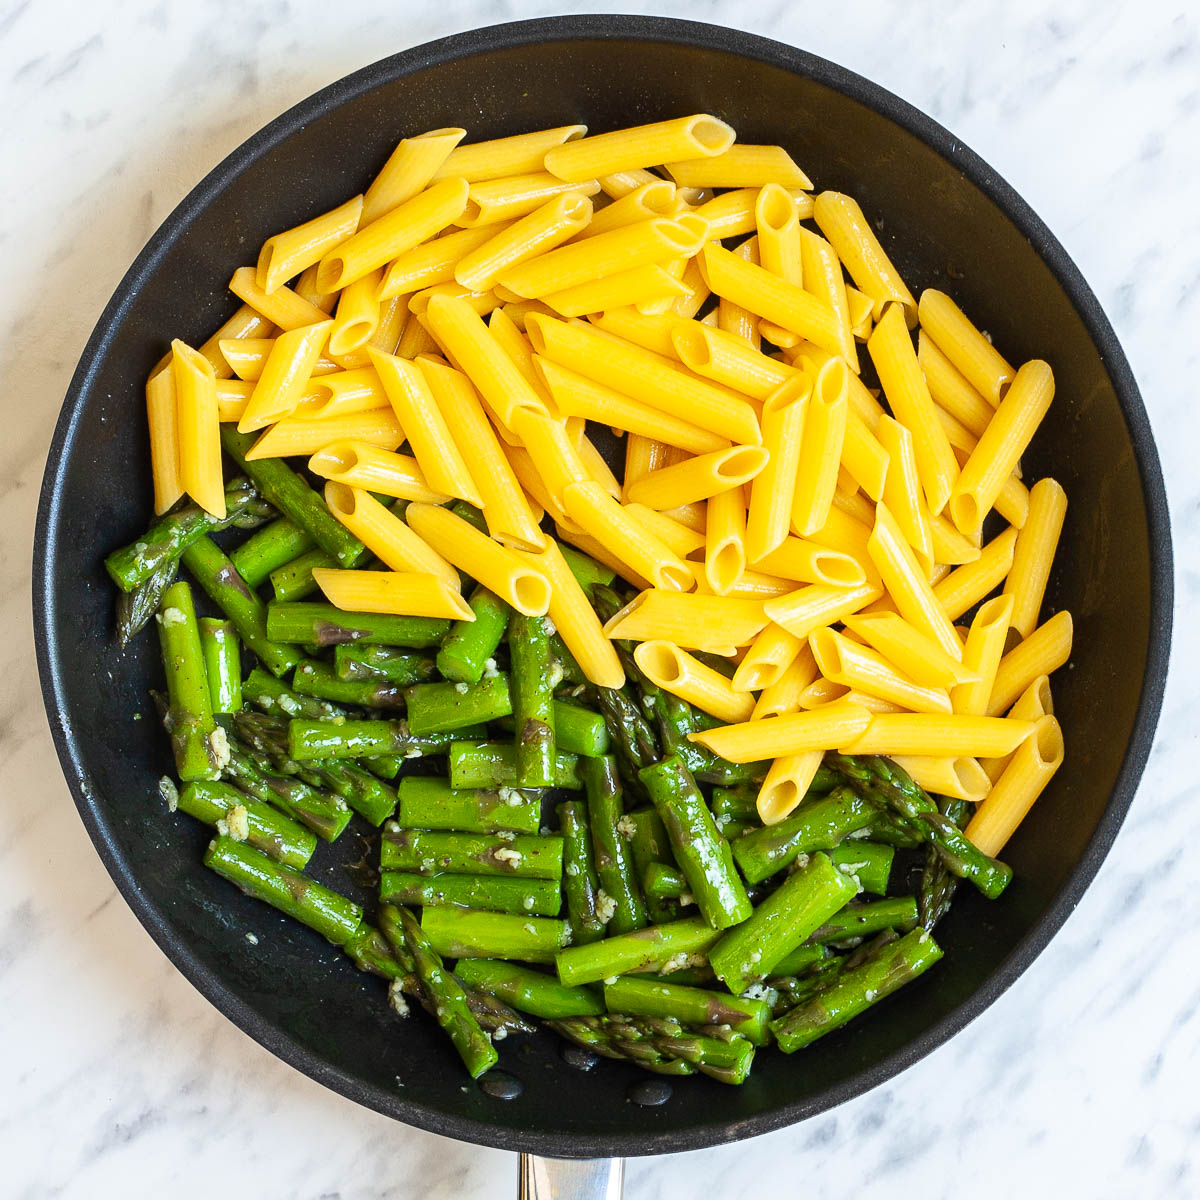 Black frying pan with penne pasta and asparagus.